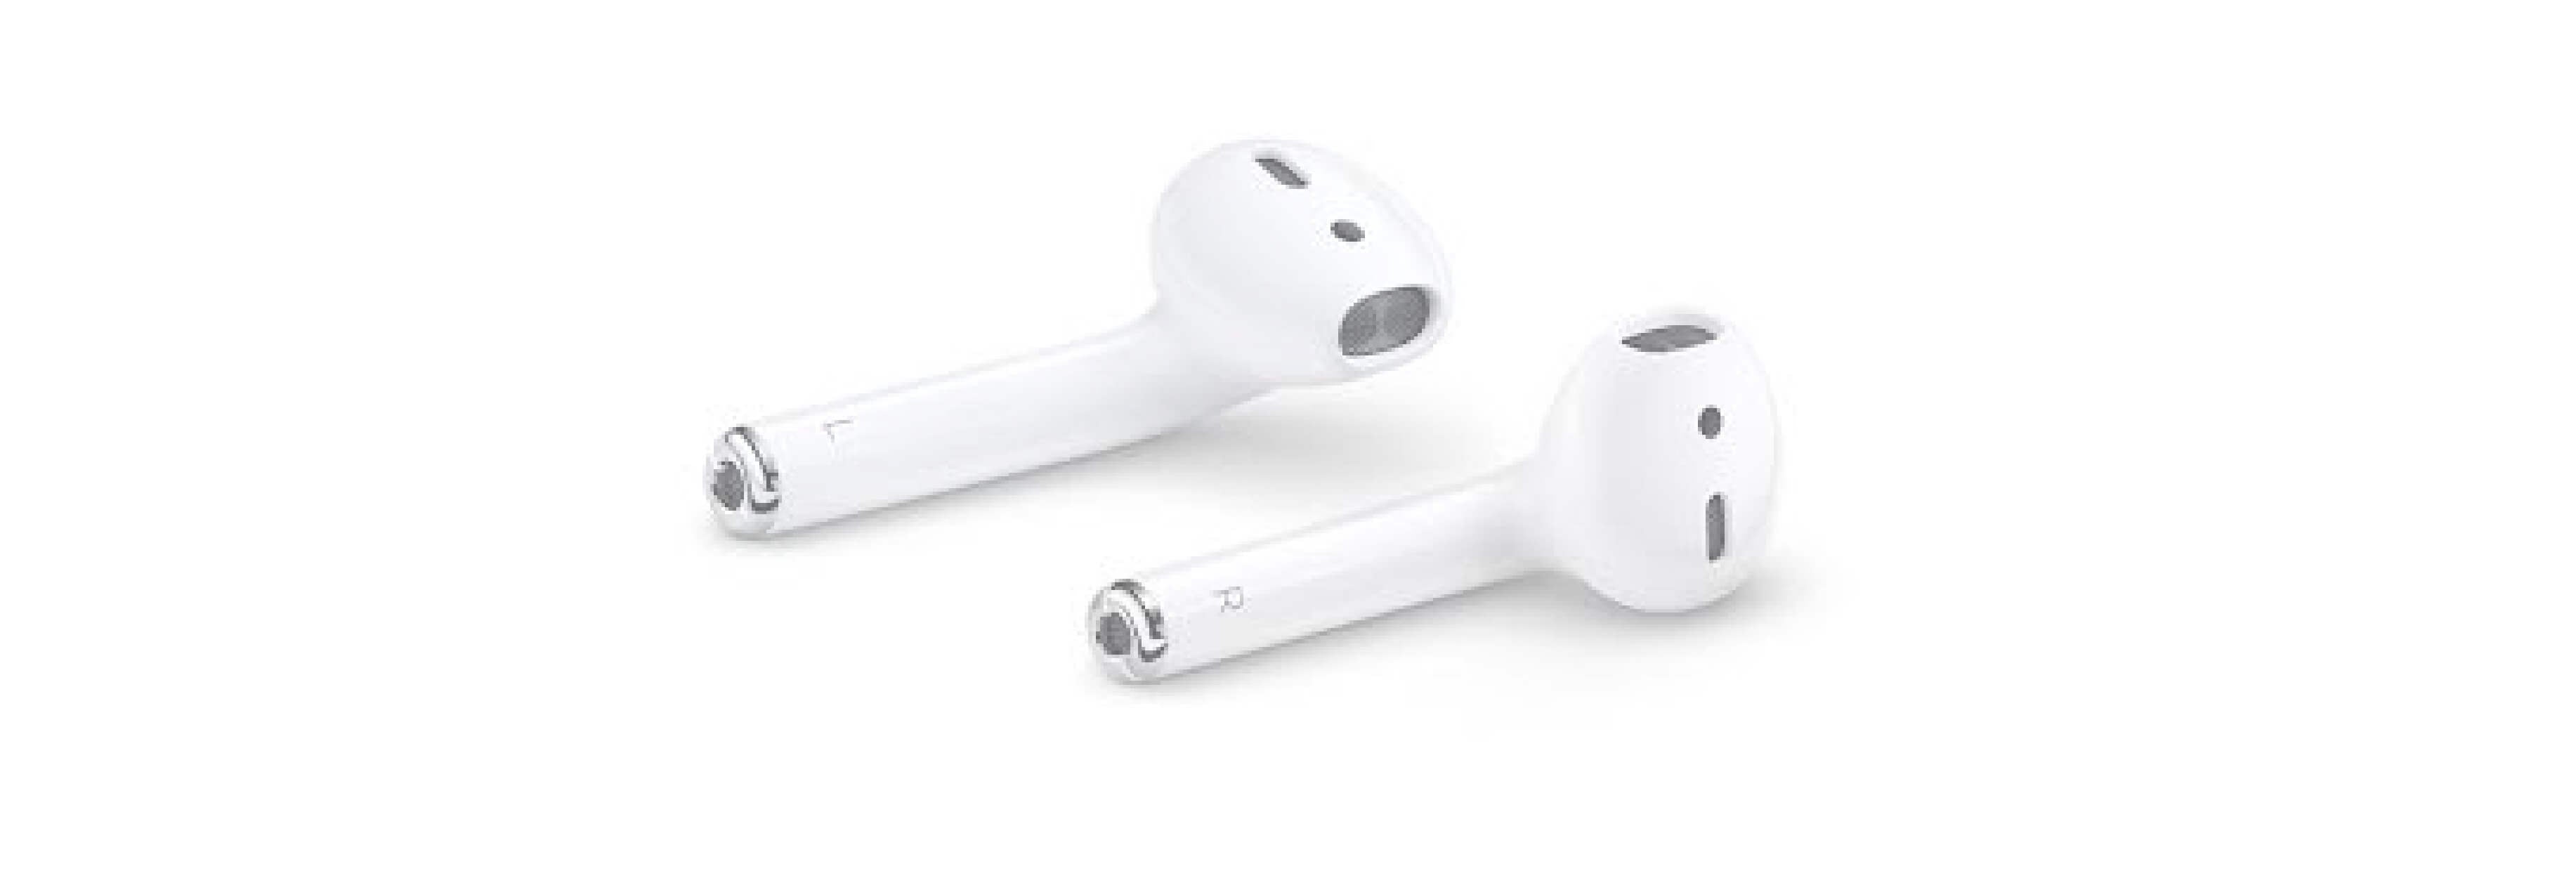 Can you pair a single AirPod  to a different single AirPod?